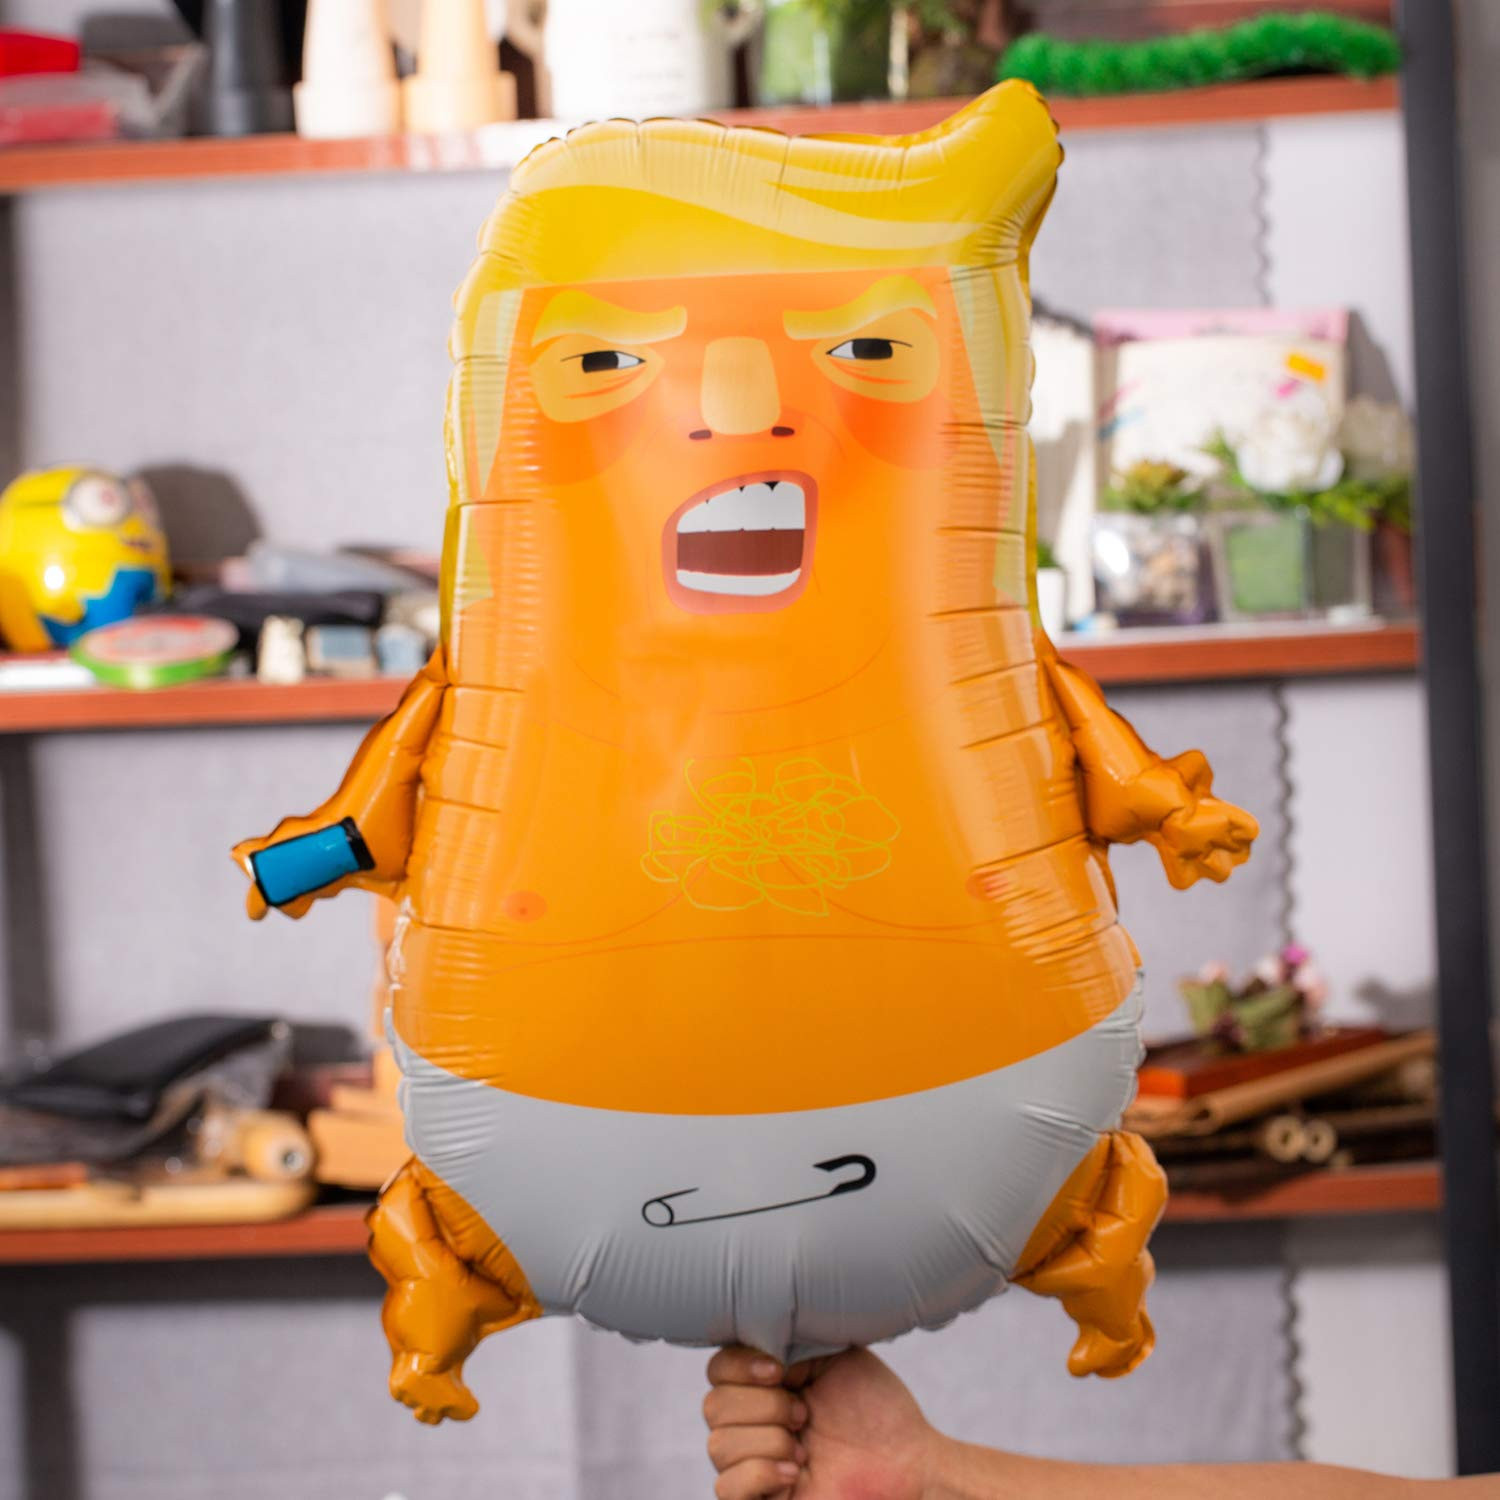 Party City Baby Balloons
 Amazon Trump Baby Balloons 3 Inflatable Balloons